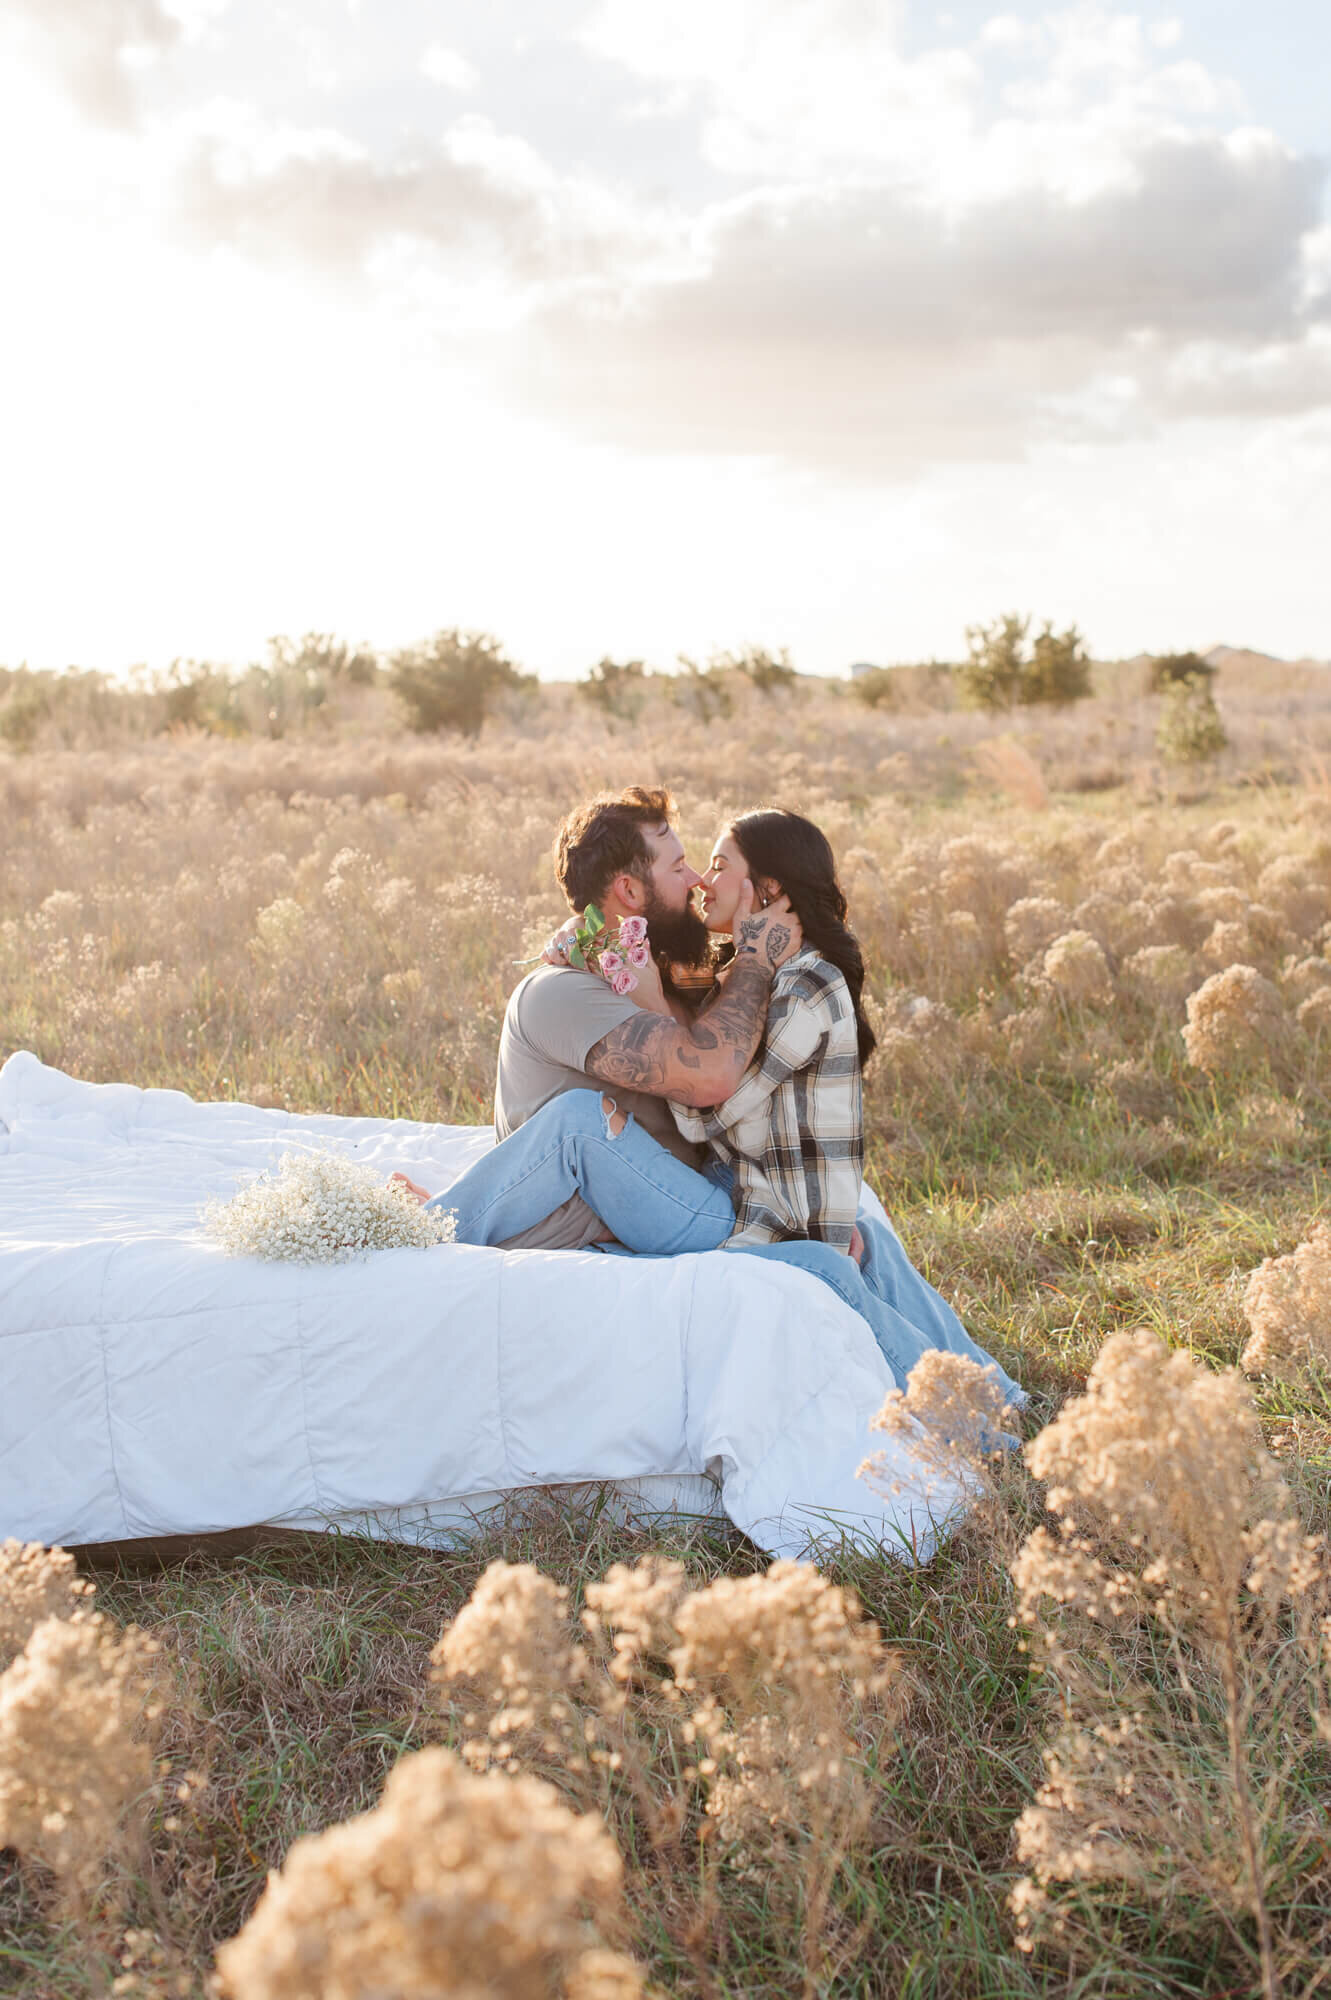 Couple kissing while holding each other on an air mattress in the middle of a tall grass field